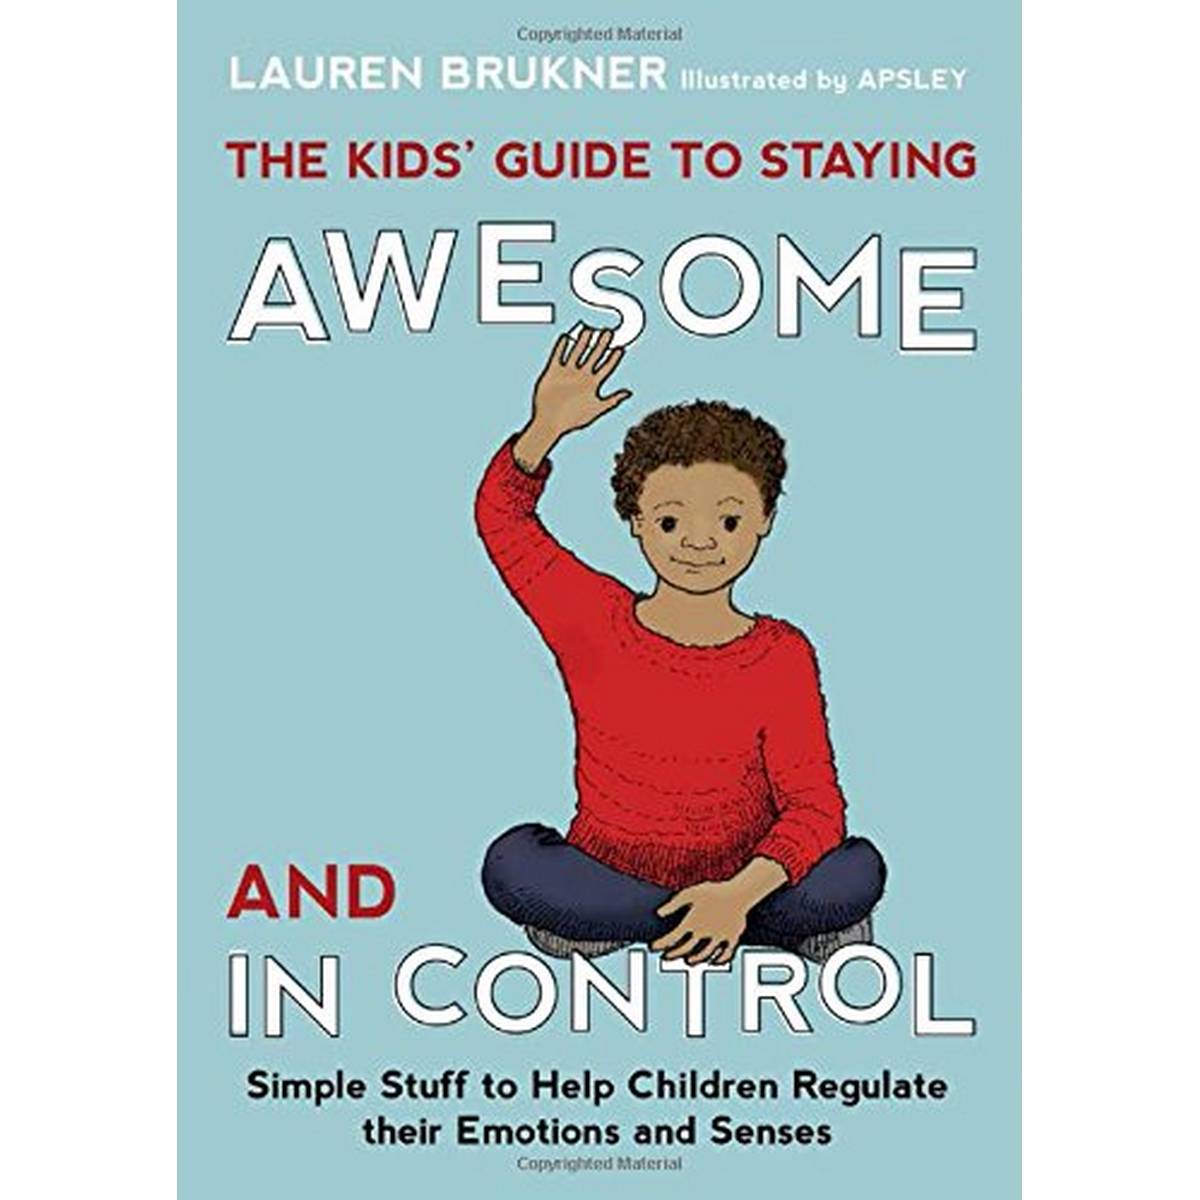 The Kids' Guide to Staying Awesome and In Control